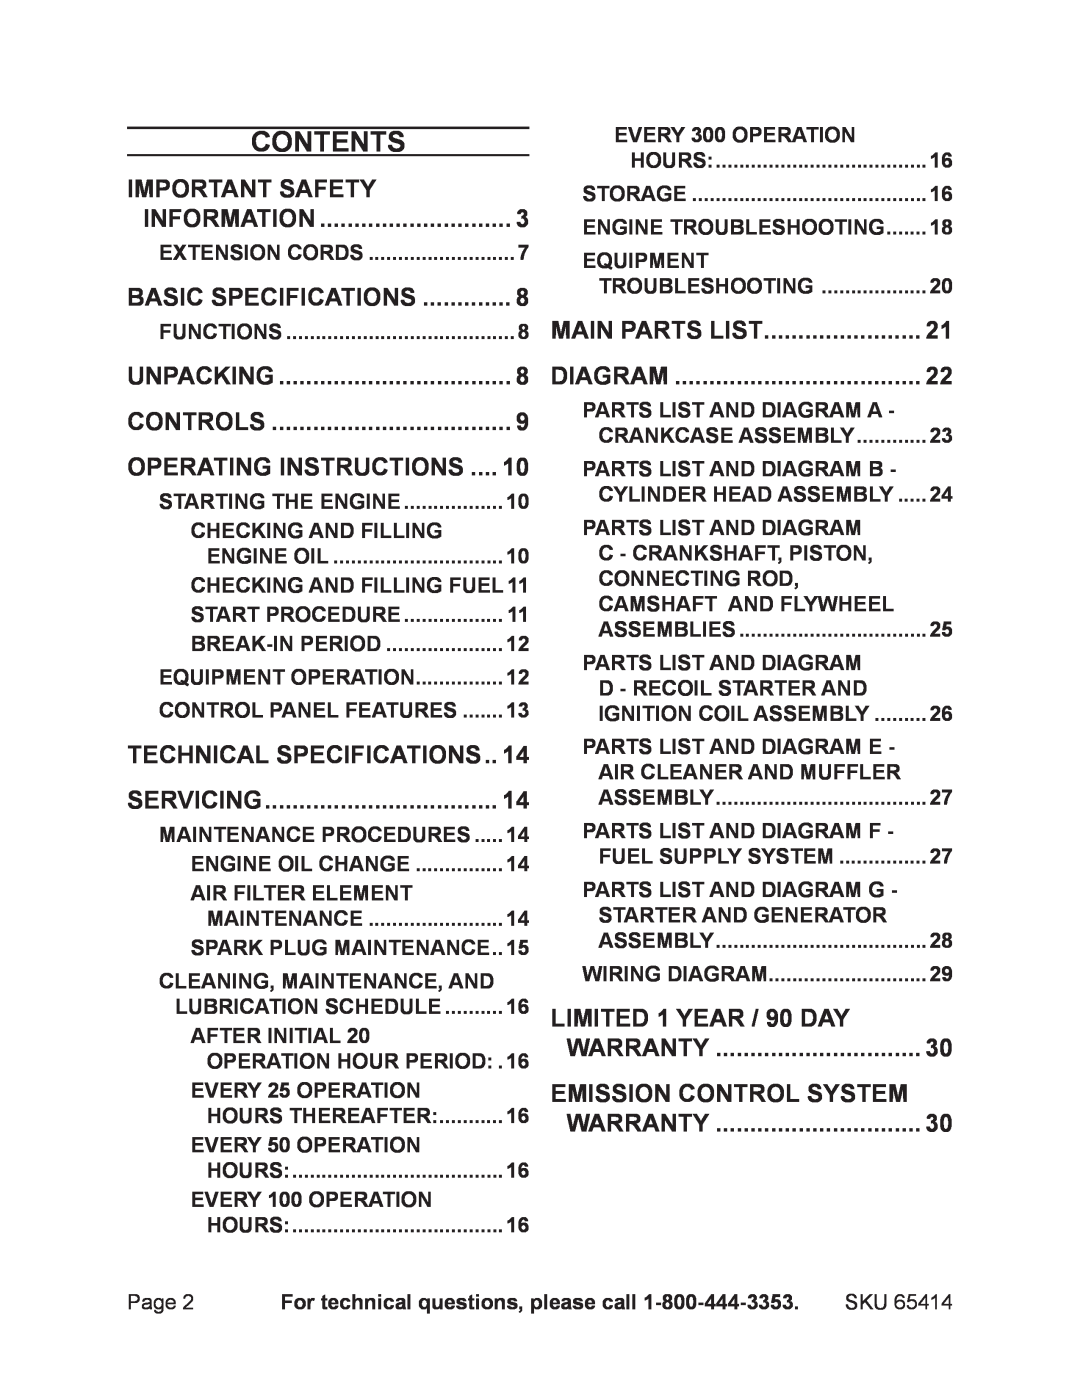 Chicago Electric 65414 manual Contents 